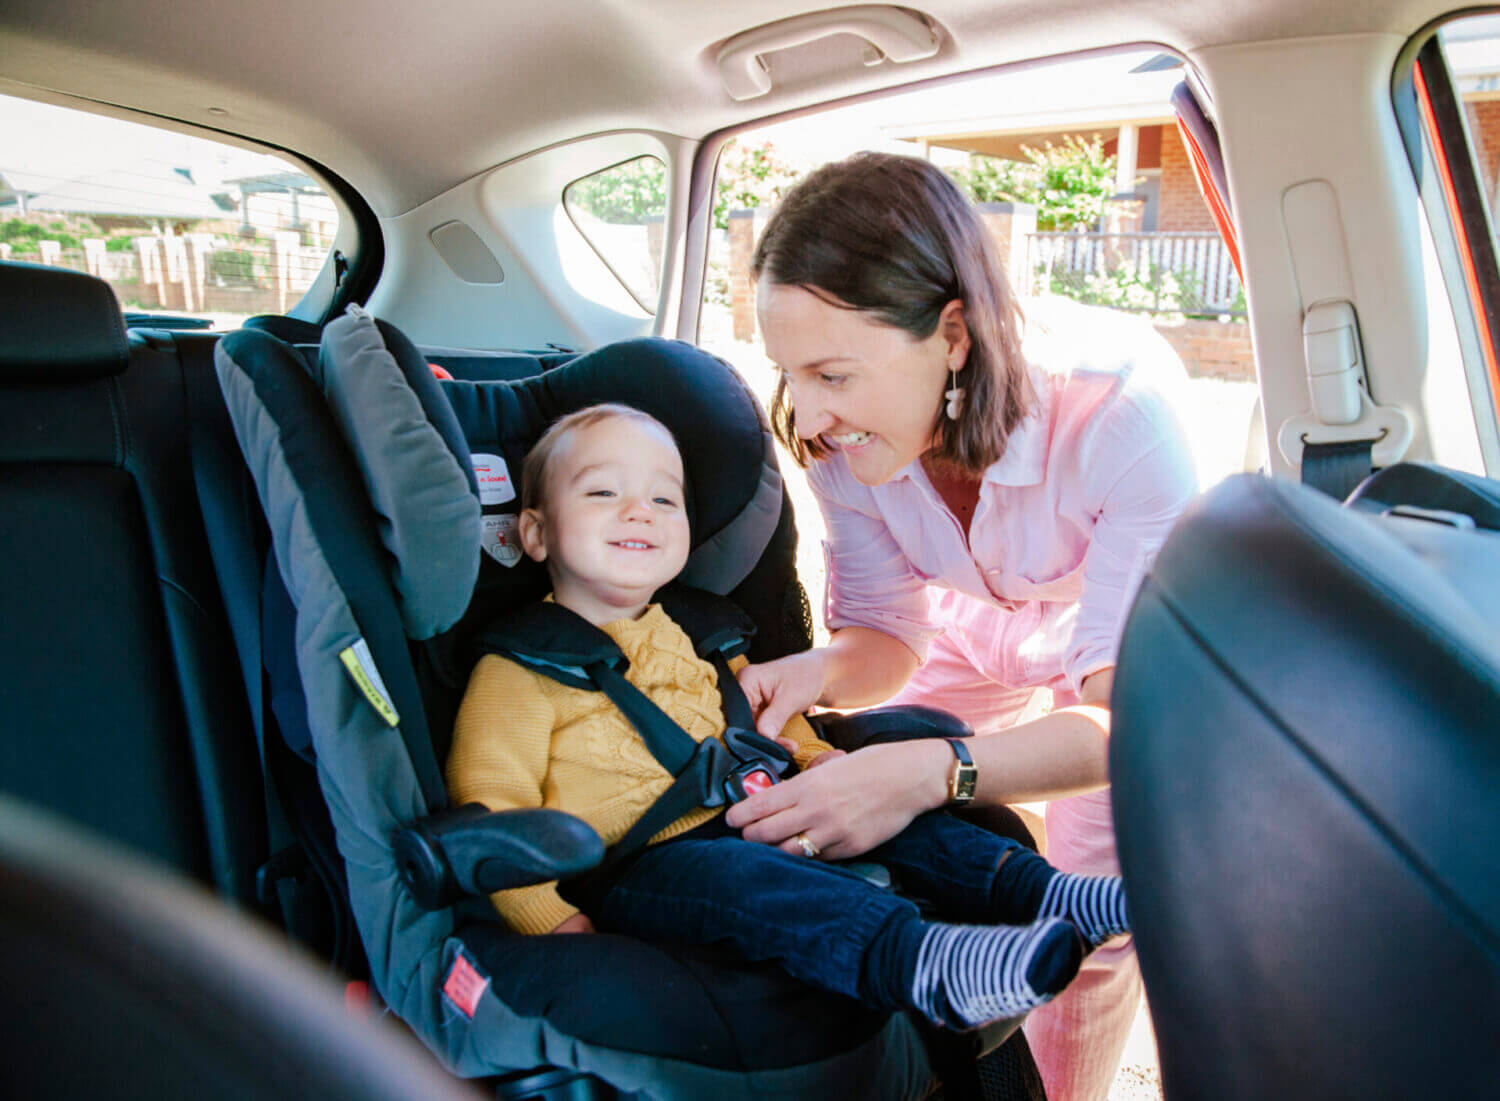 Authorised Child Restraint Fitters will be in Condobolin on Thursday, 11 May 2023 to conduct free child restraint checks. Bookings are essential - phone 6861 2364 to secure your place. Image Credit: Melanie Suitor.